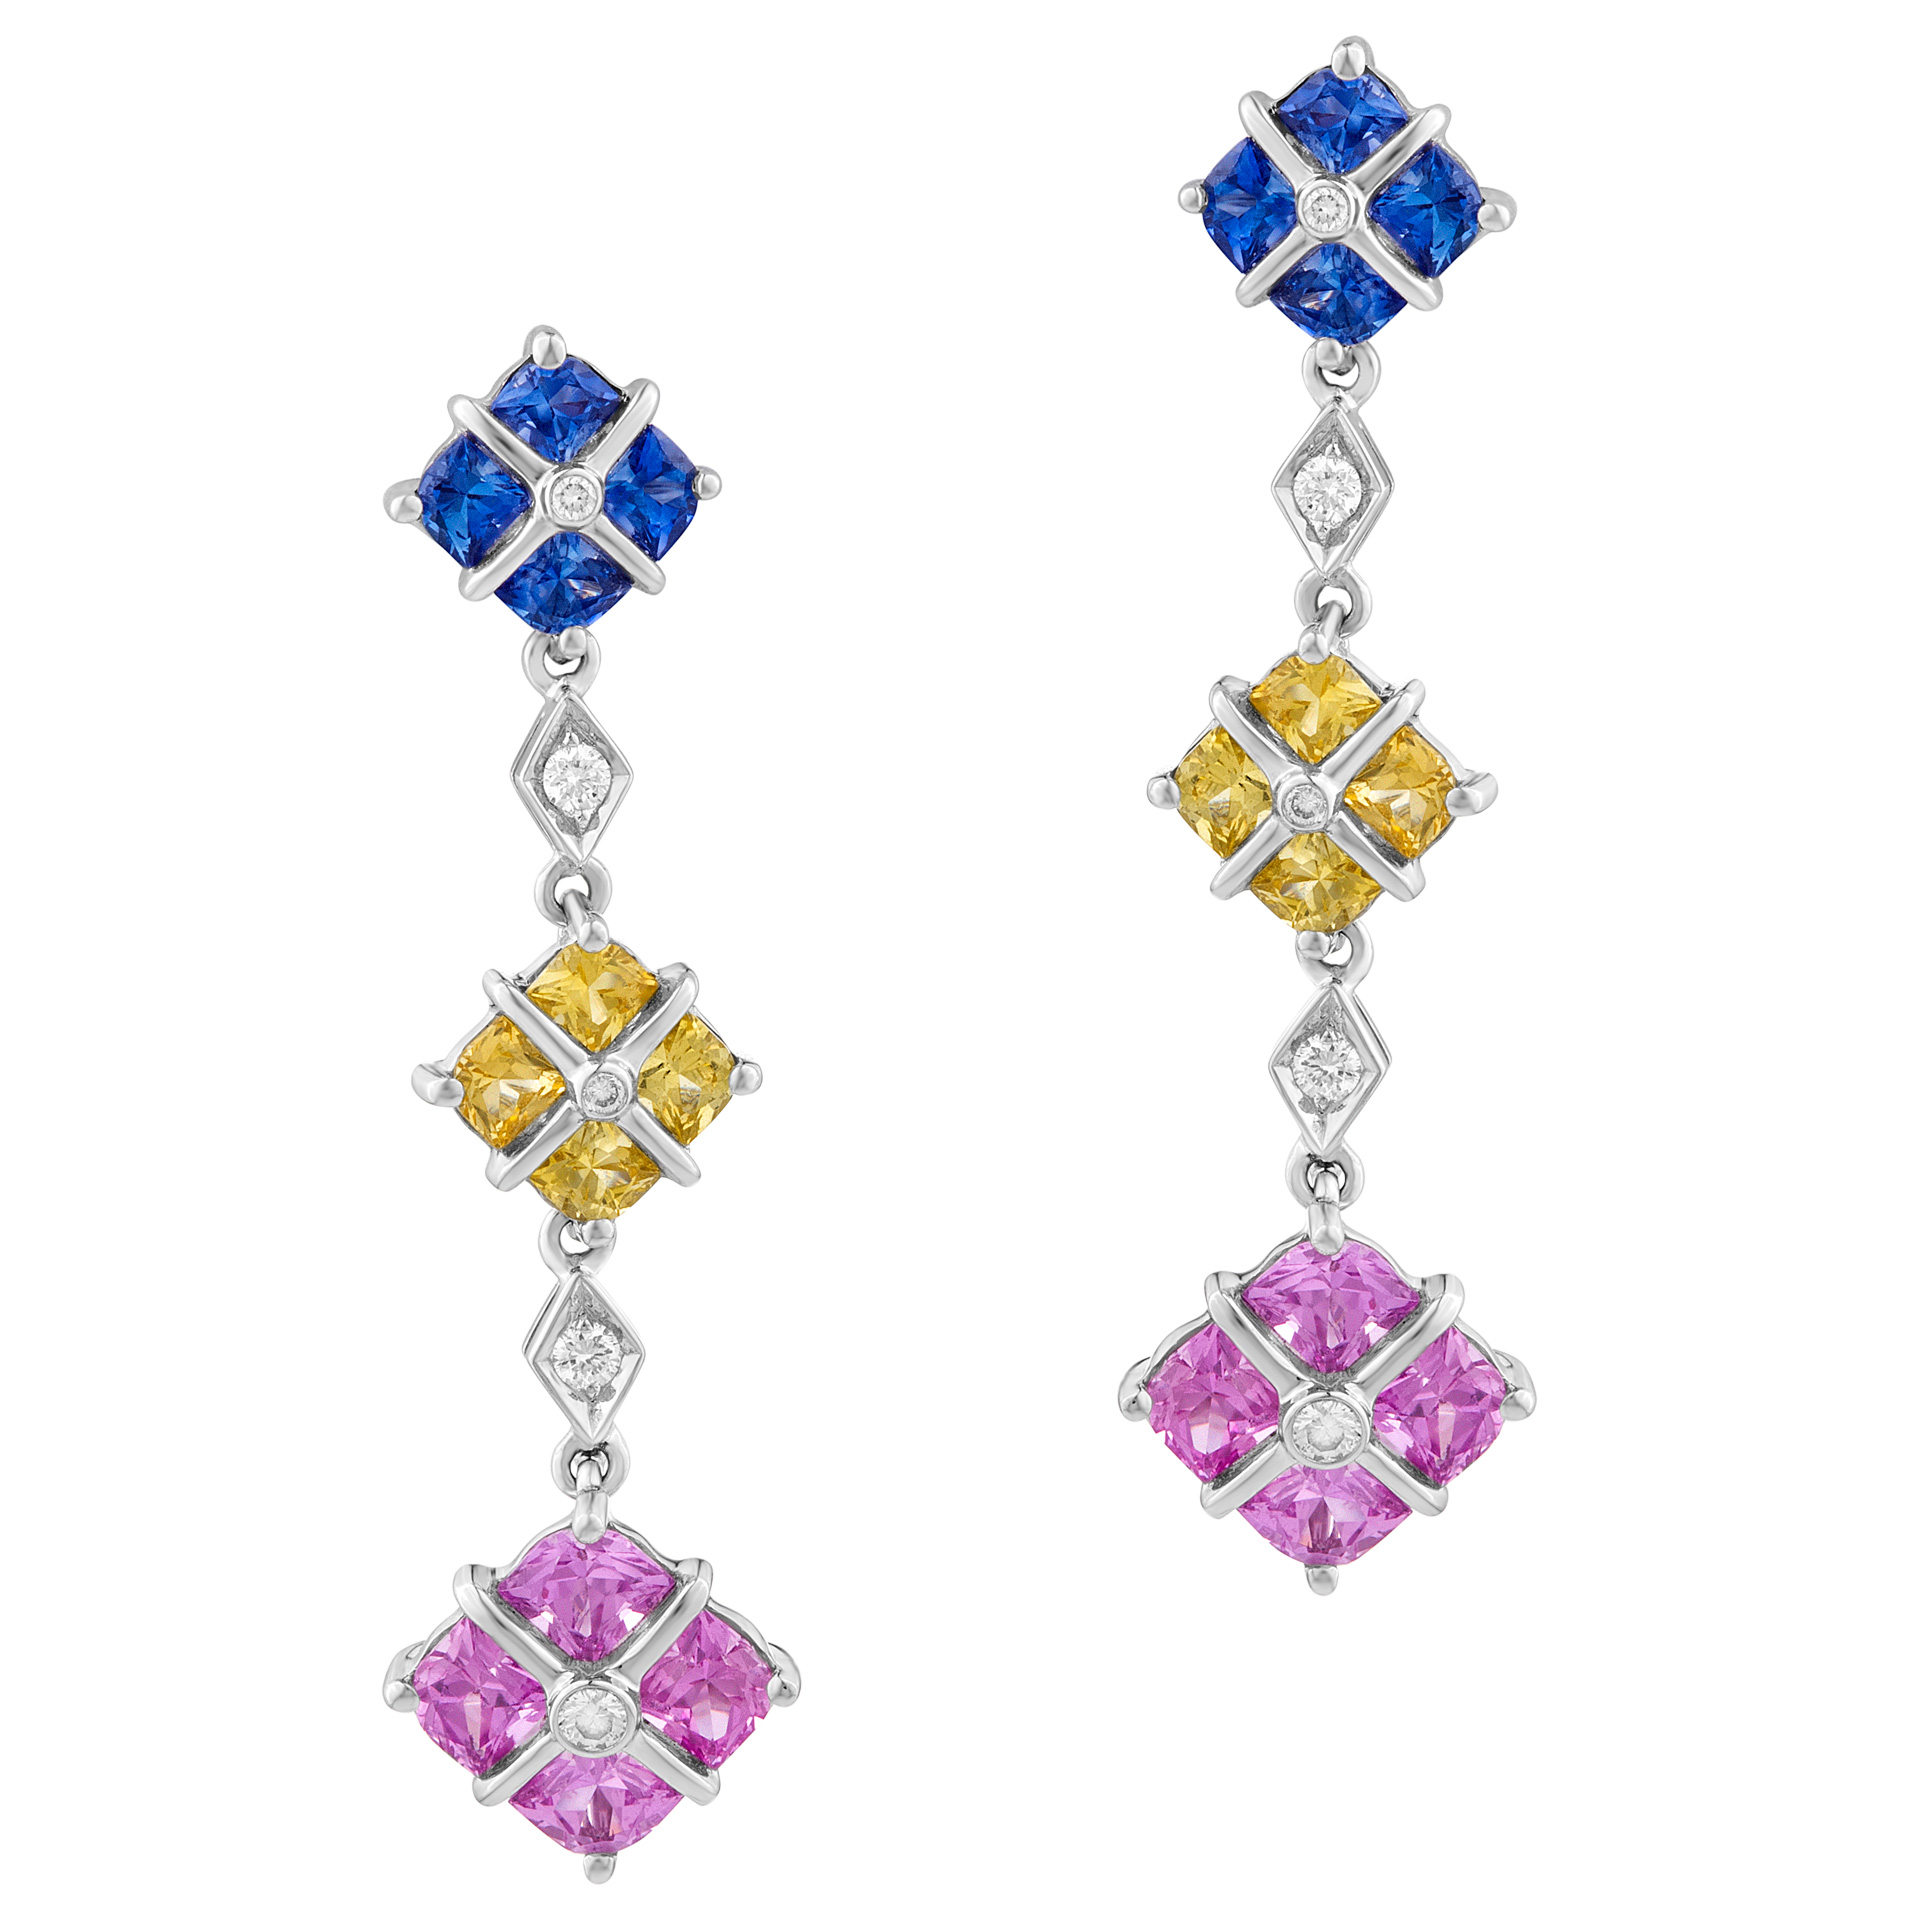 Blue, pink and yellow sapphire and diamond earrings set in 18k whit gold image 1